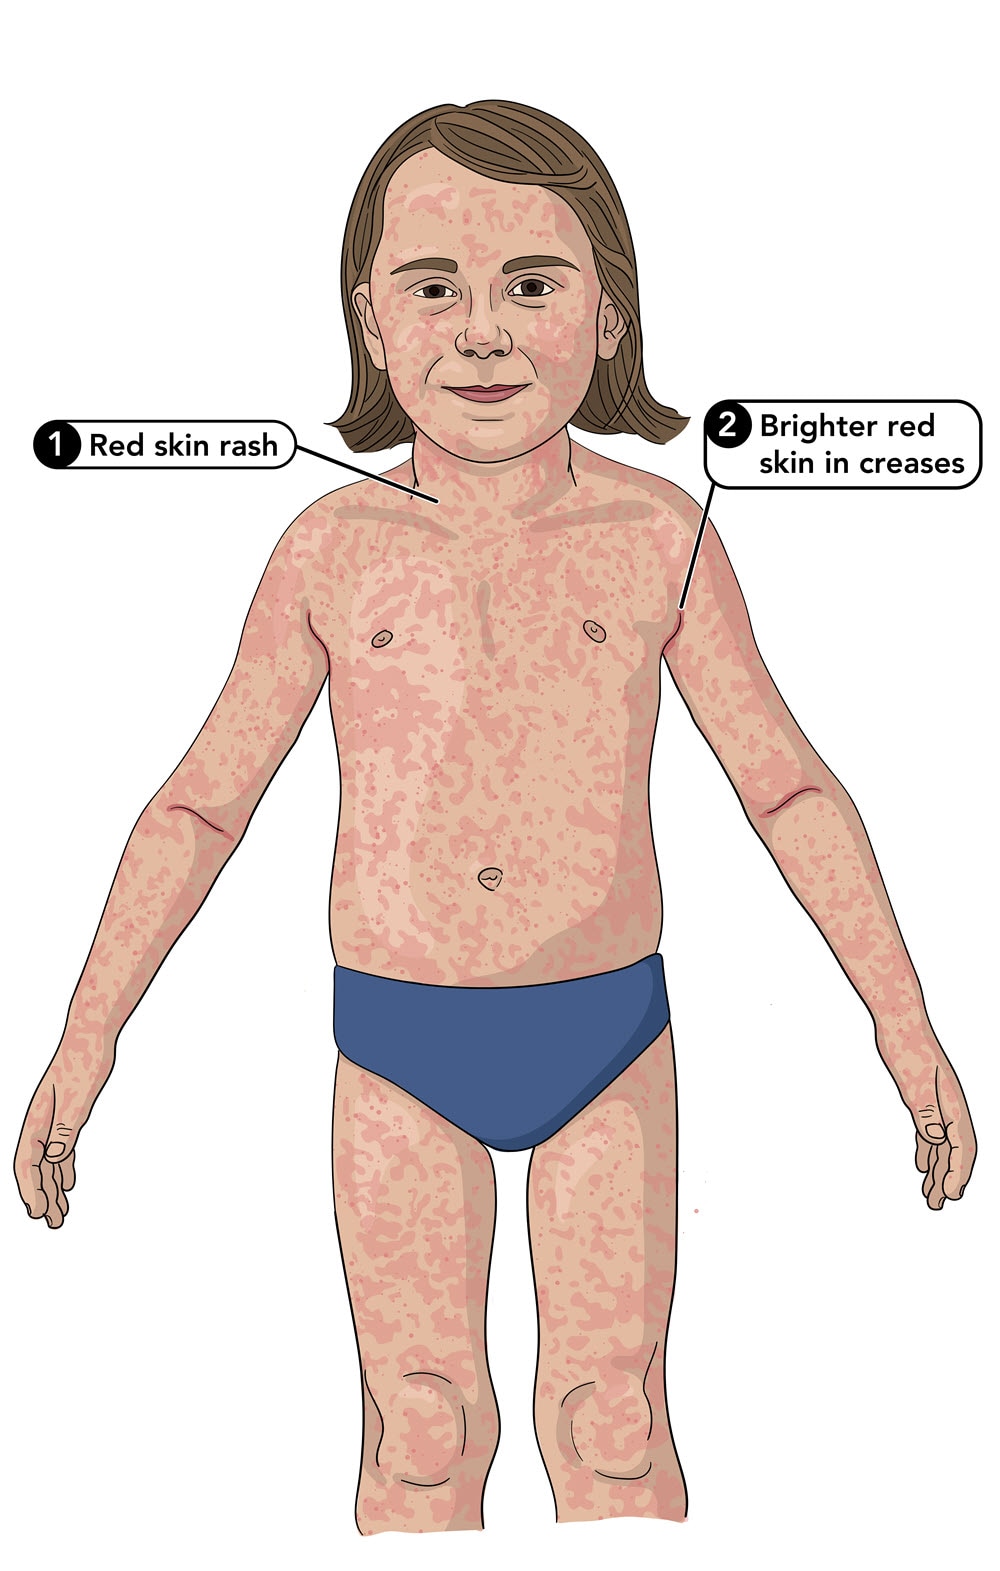 Doctor explains SCARLET FEVER (Group A Streptococcal disease) - CAUSES,  SYMPTOMS & TREATMENT 